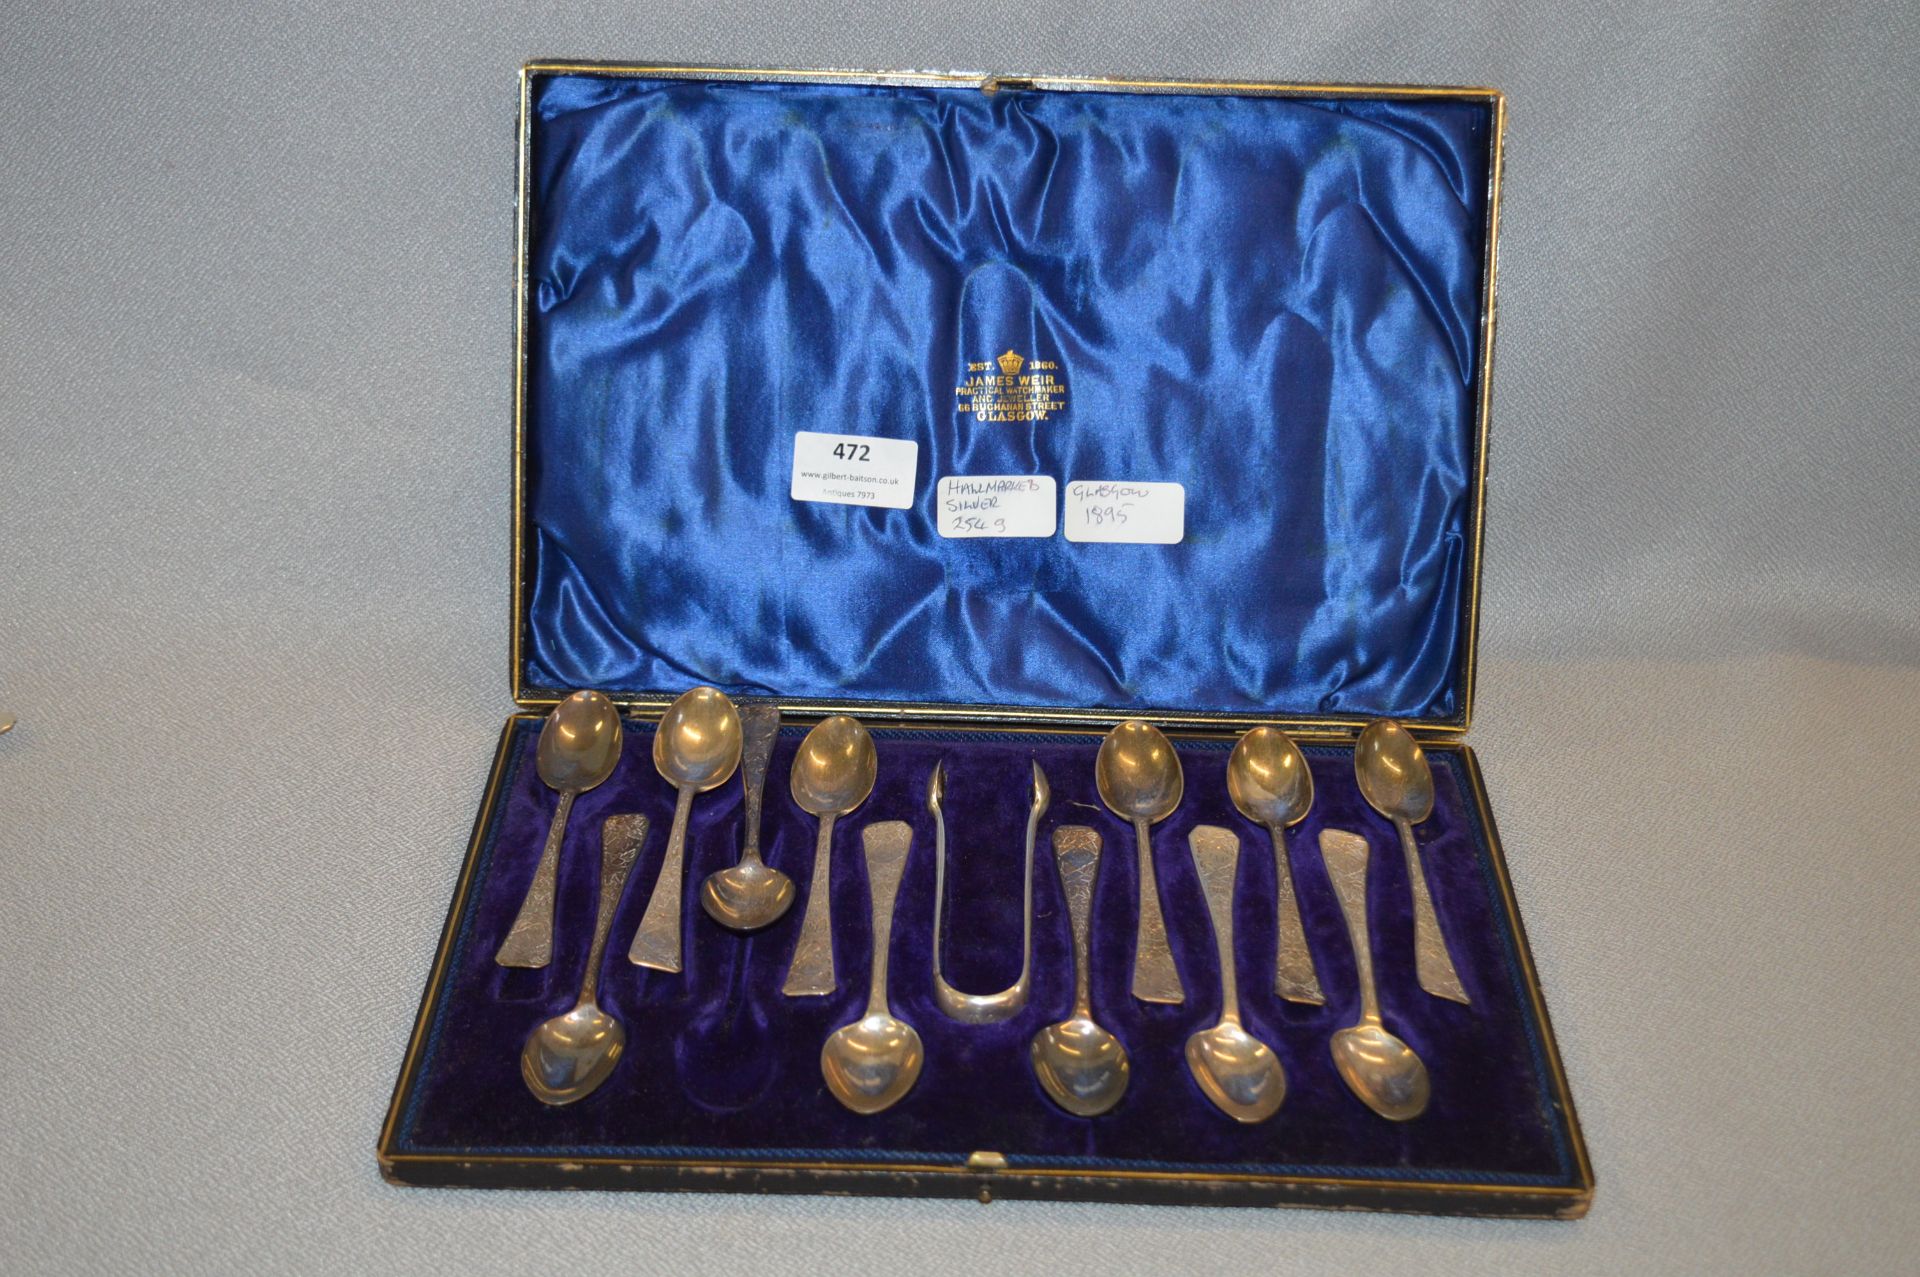 Cased Set of 12 Hallmarked Silver Spoons and Sugar Tongs - Glasgow 1895, Approx 254g